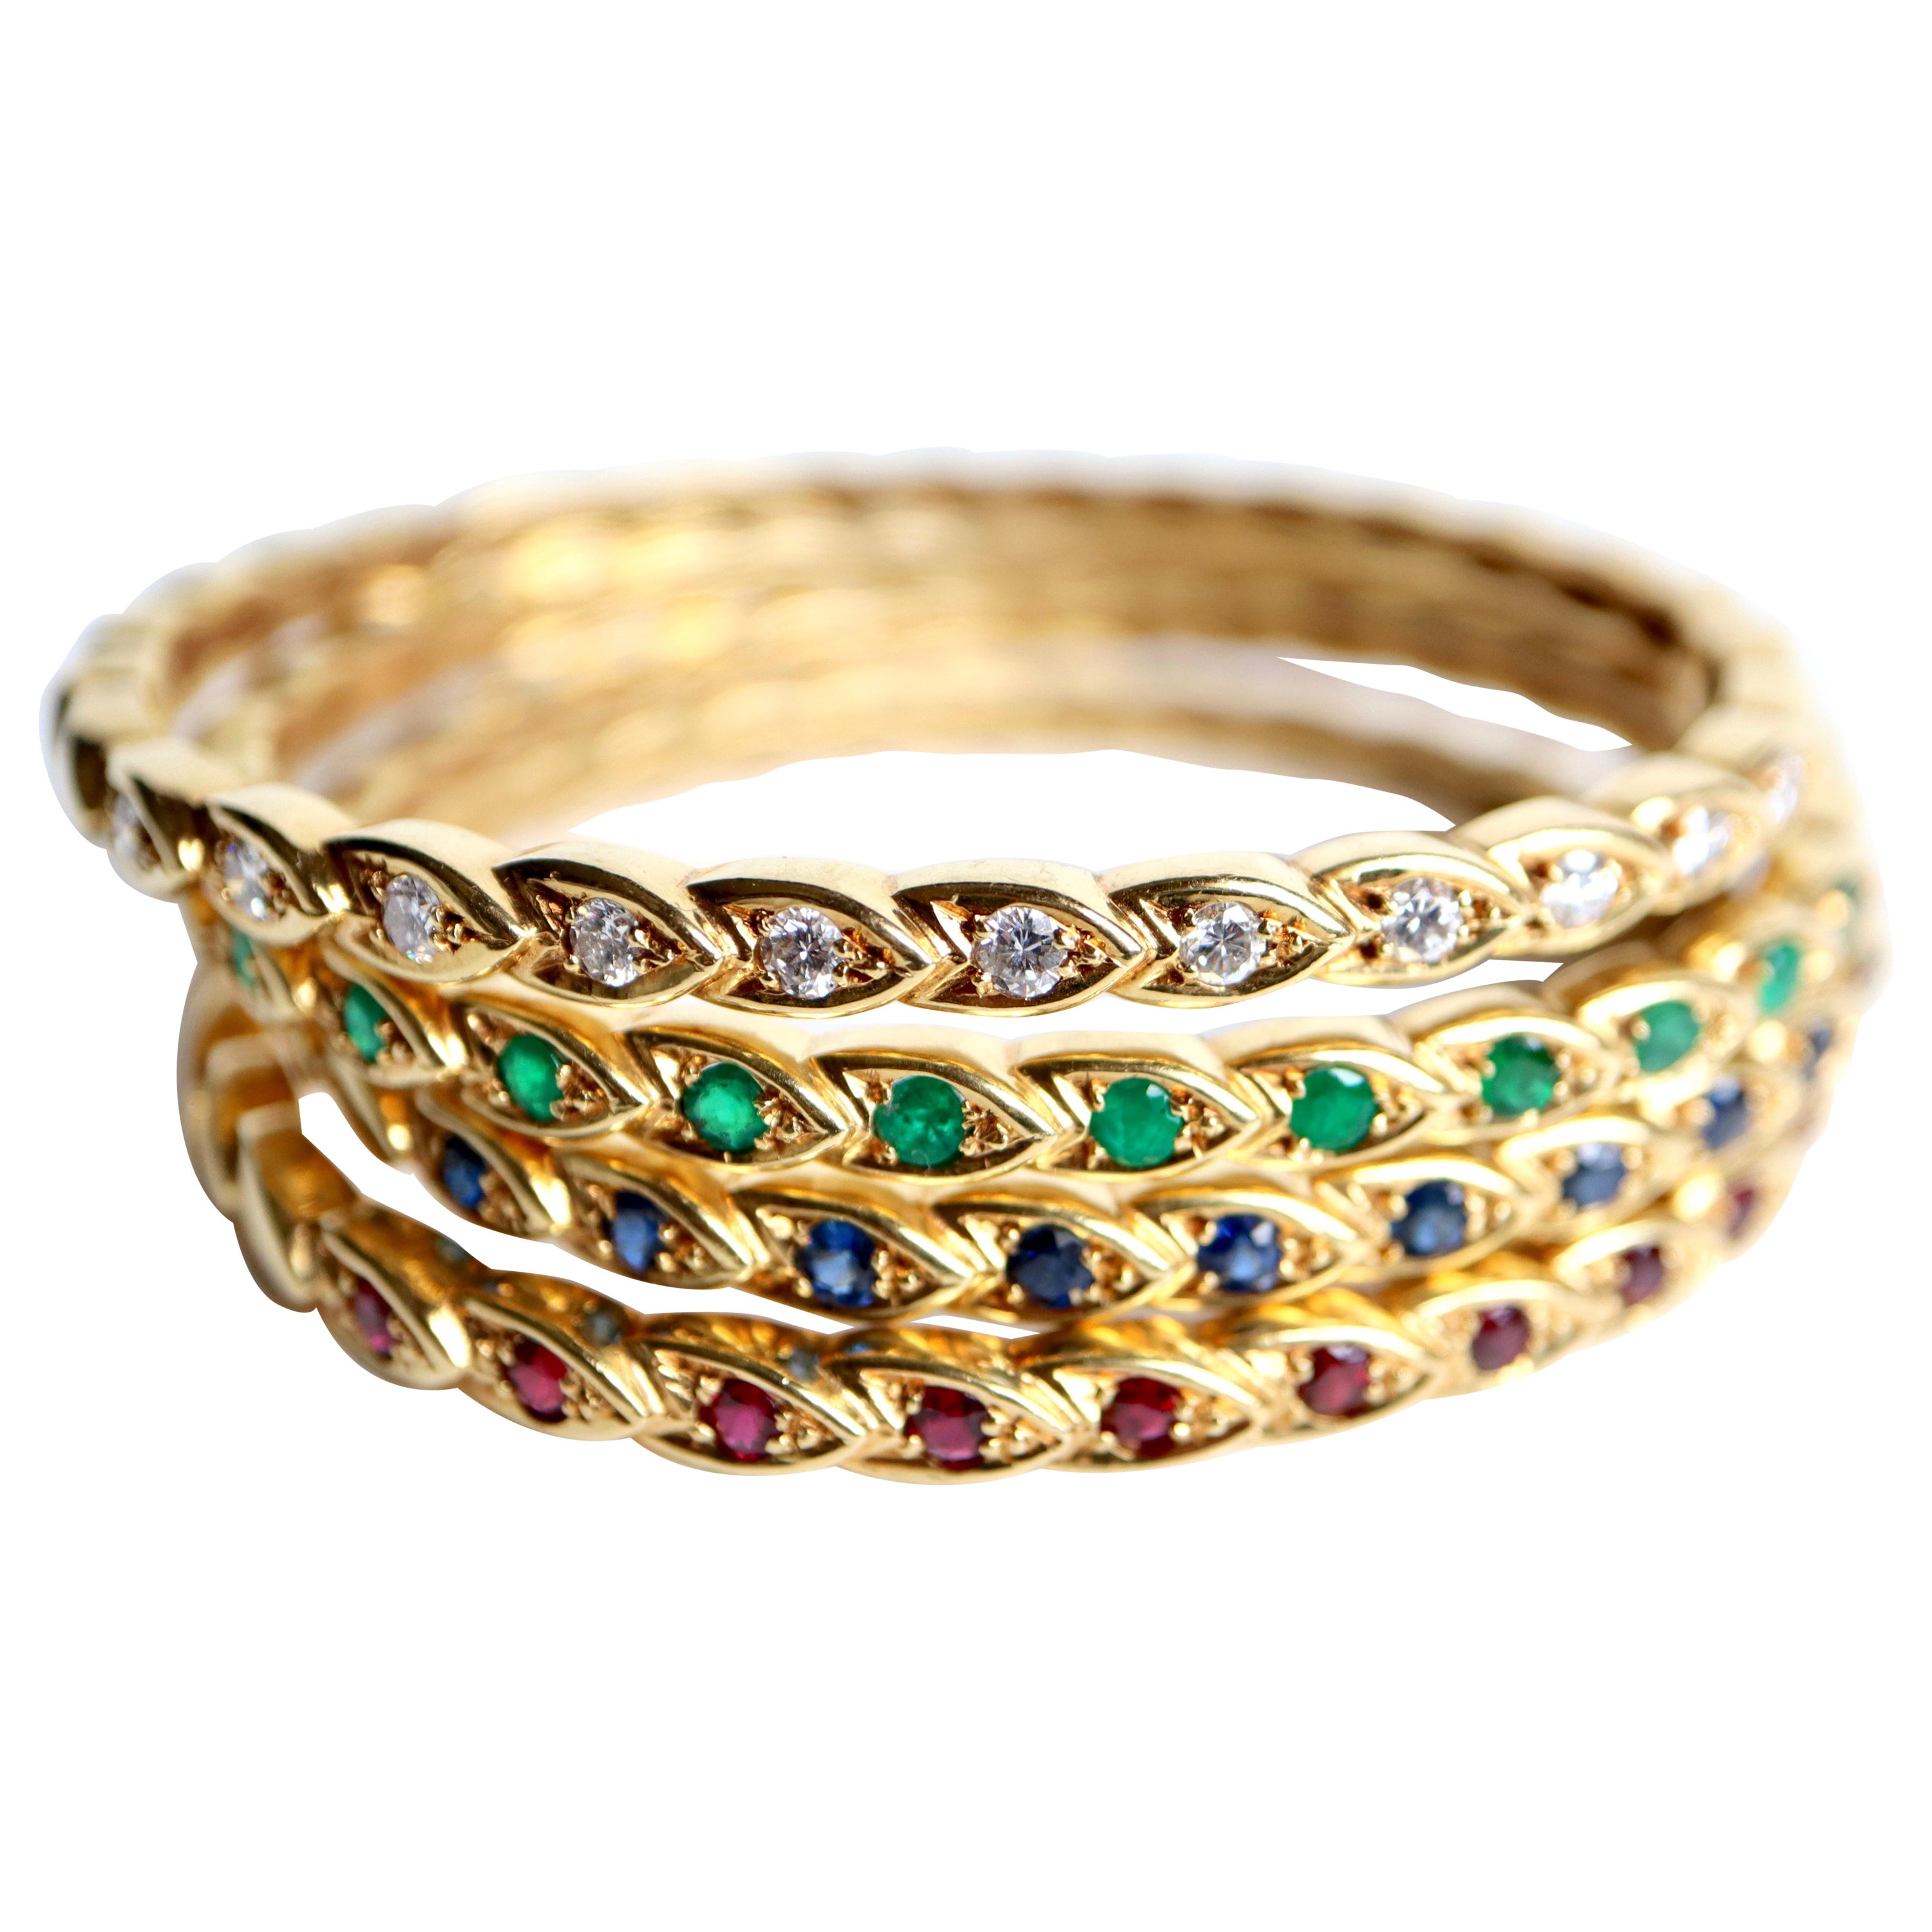 Chaumet 4 Rigid Bracelets in Yellow Gold and Precious Stones